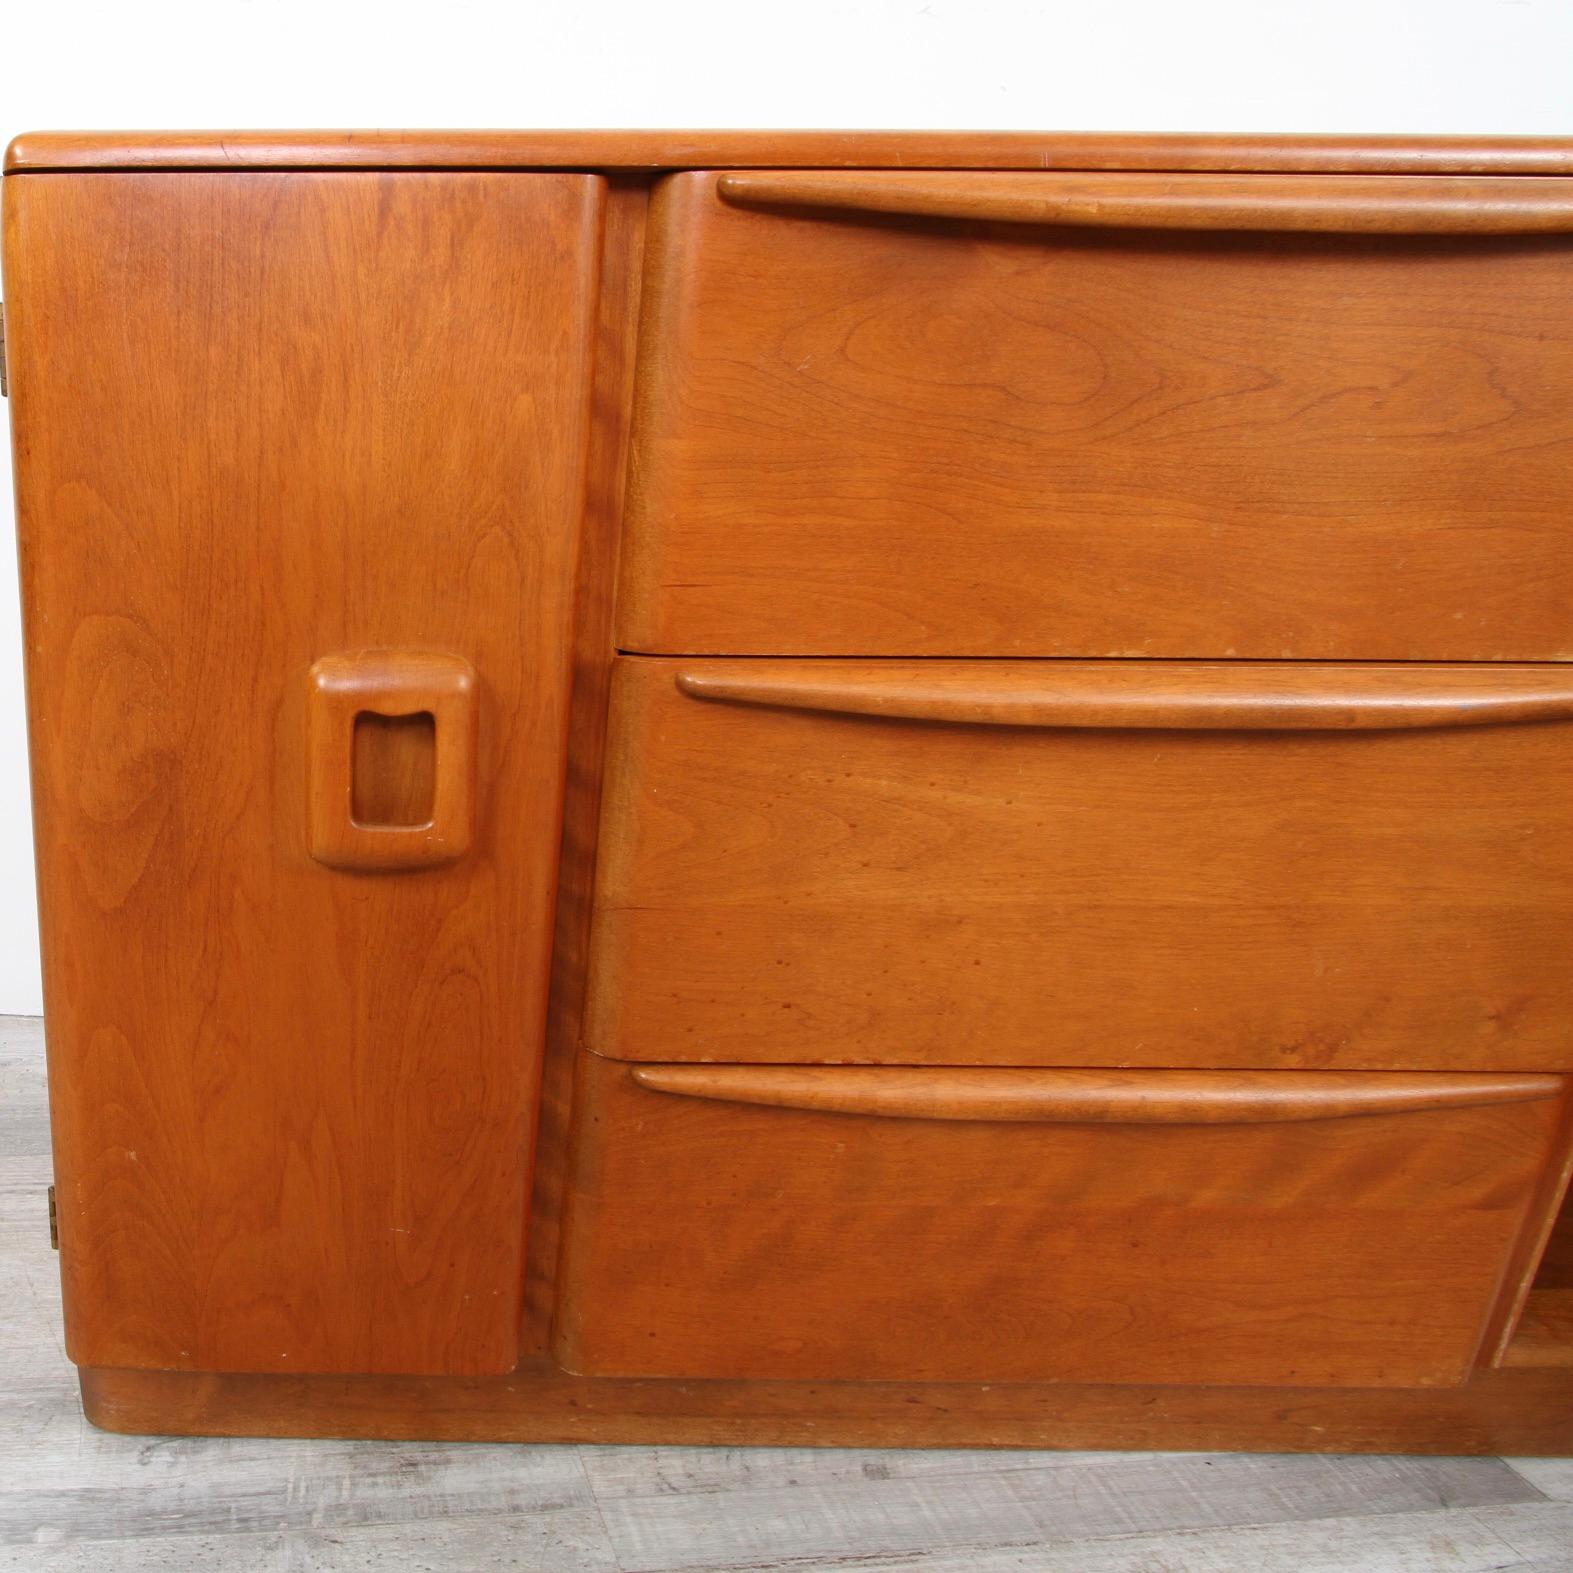 Heywood Wakefield Isabel Credenza in Wheat, c1950 In Good Condition For Sale In New London, CT